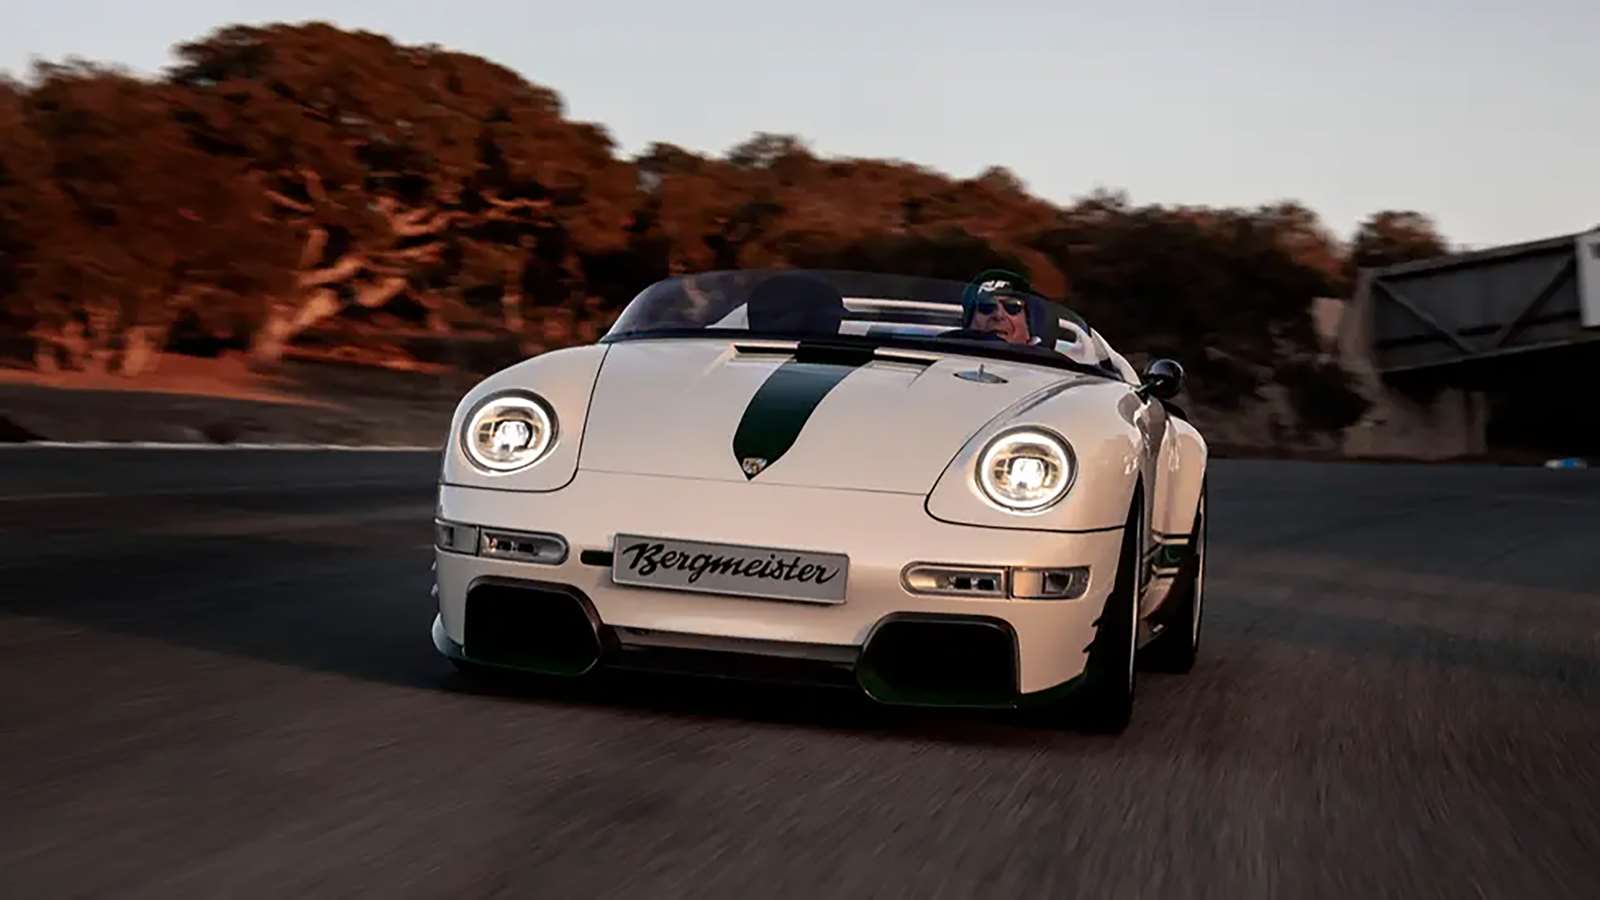 The Bergmeister is RUF's tribute to the Porsche 993